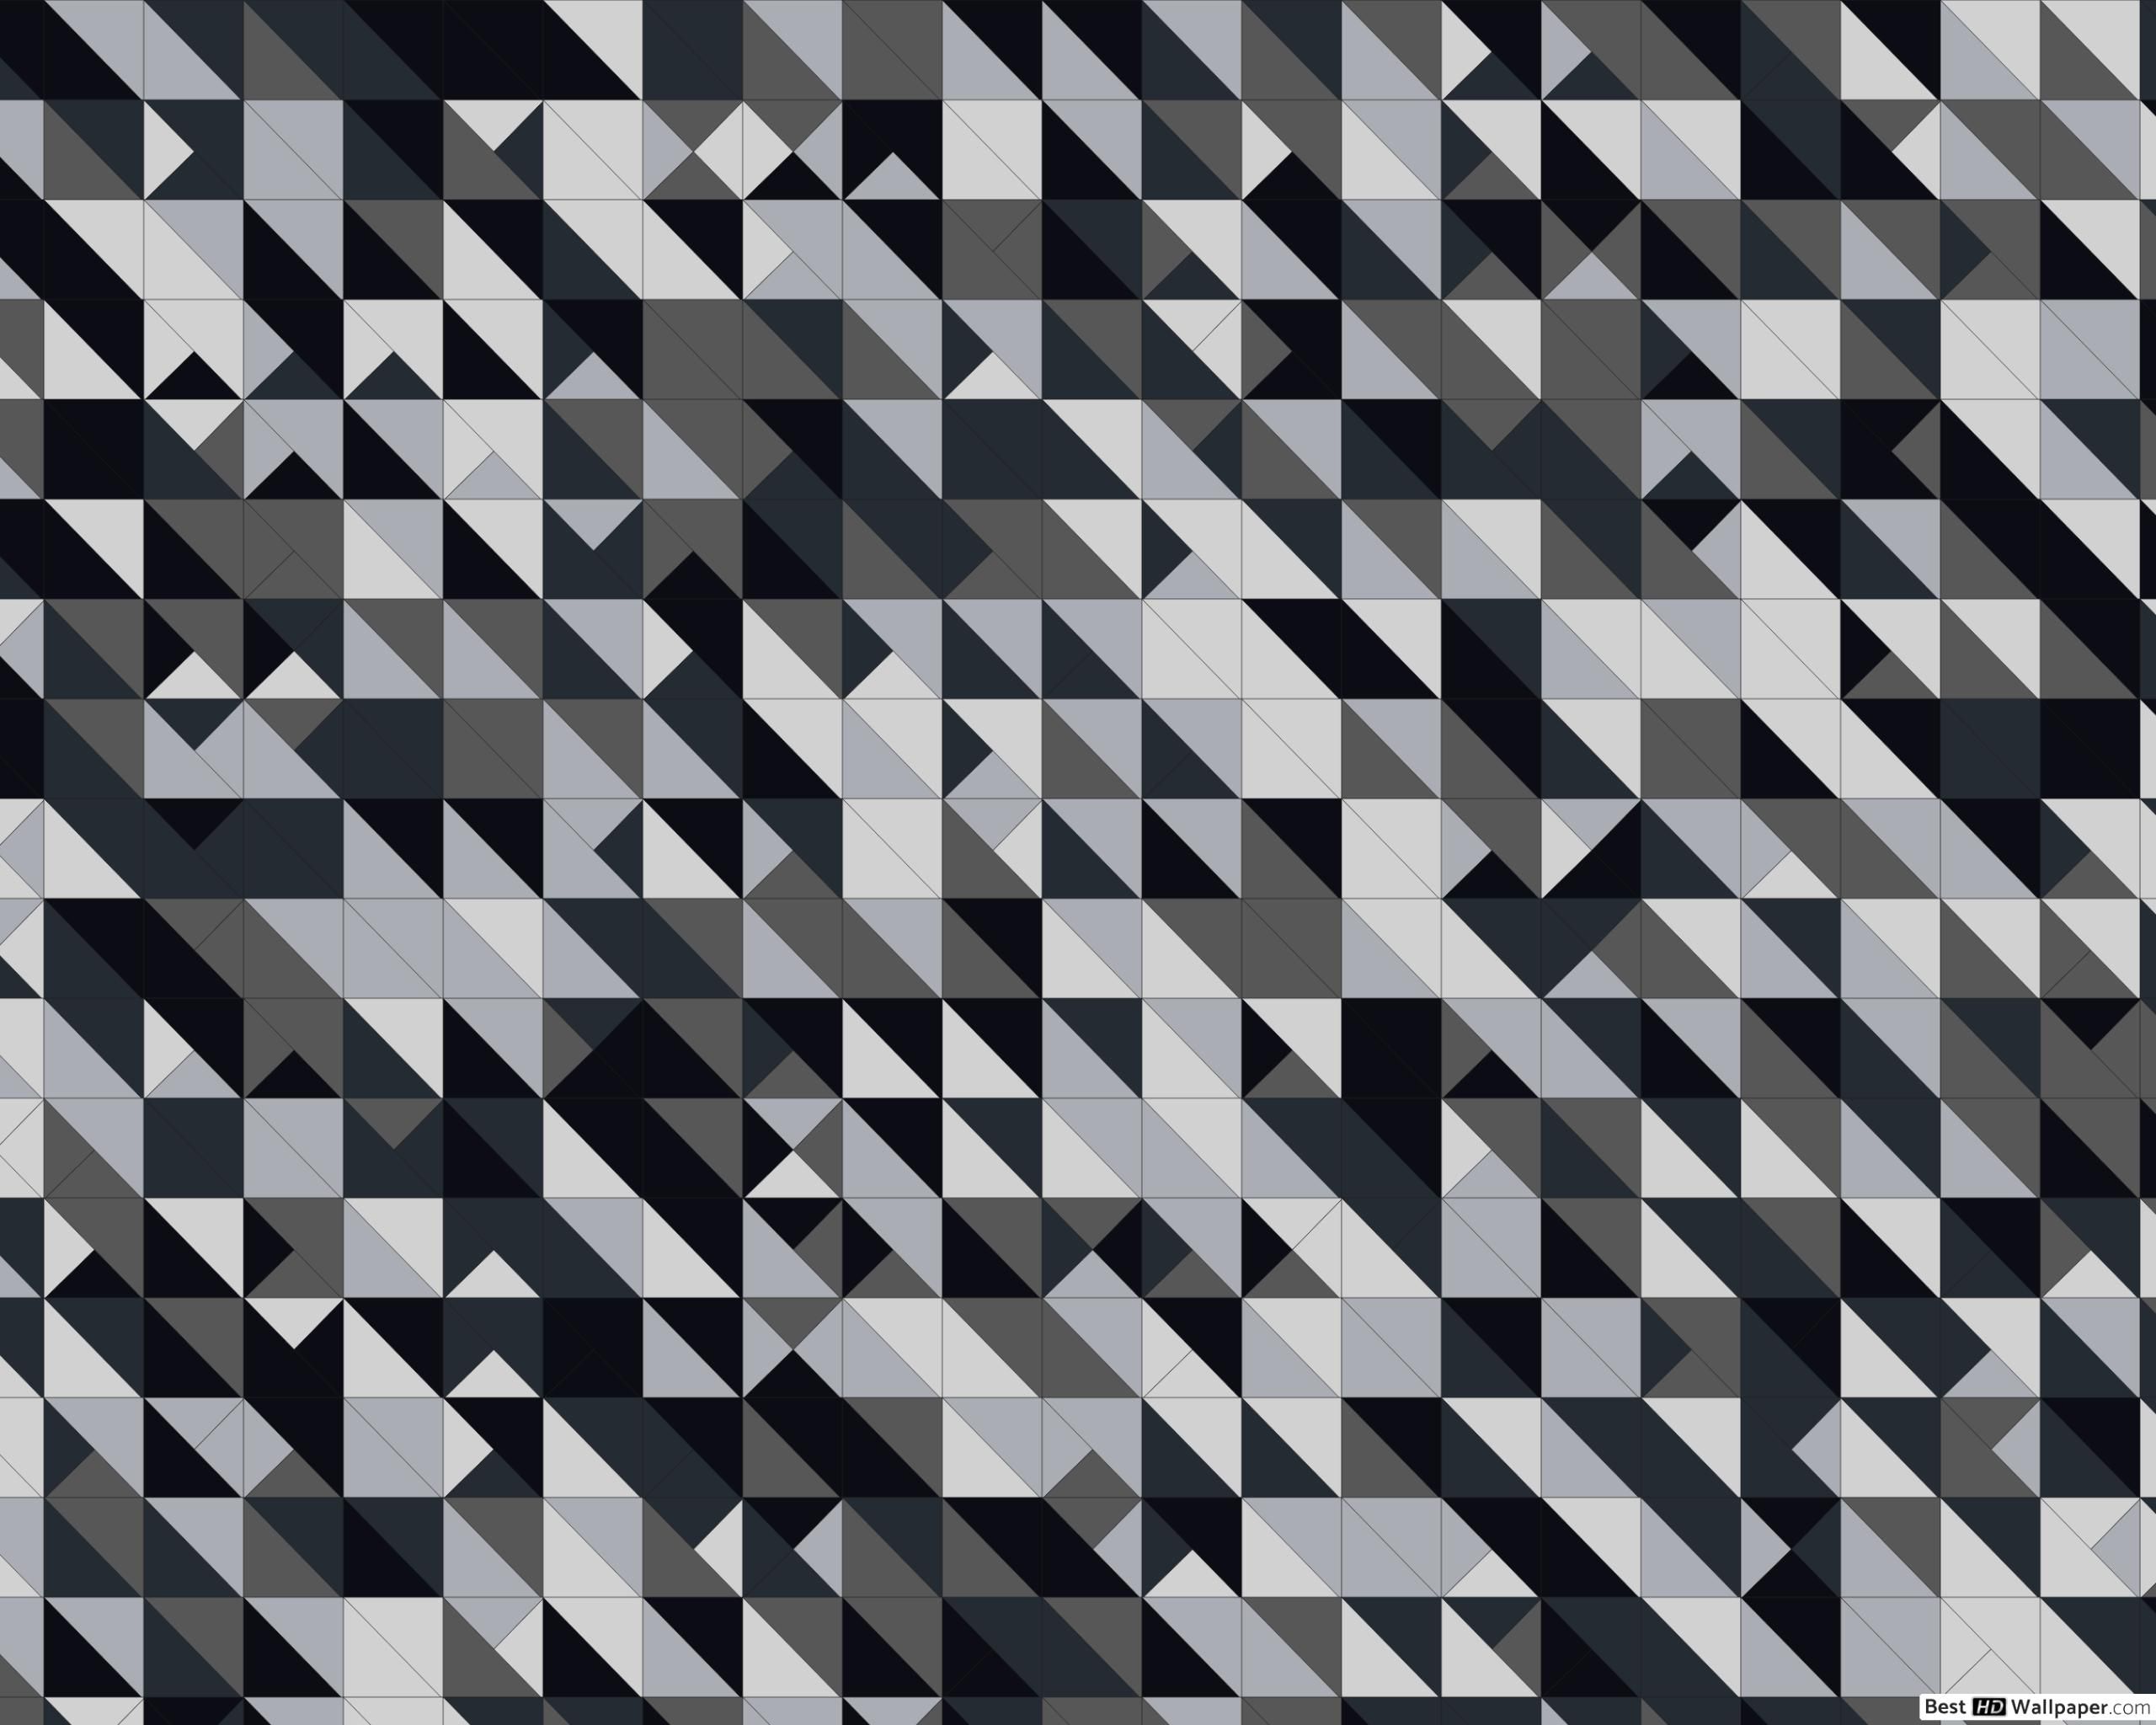 Inverted Black Square Vector Art Wallpapers